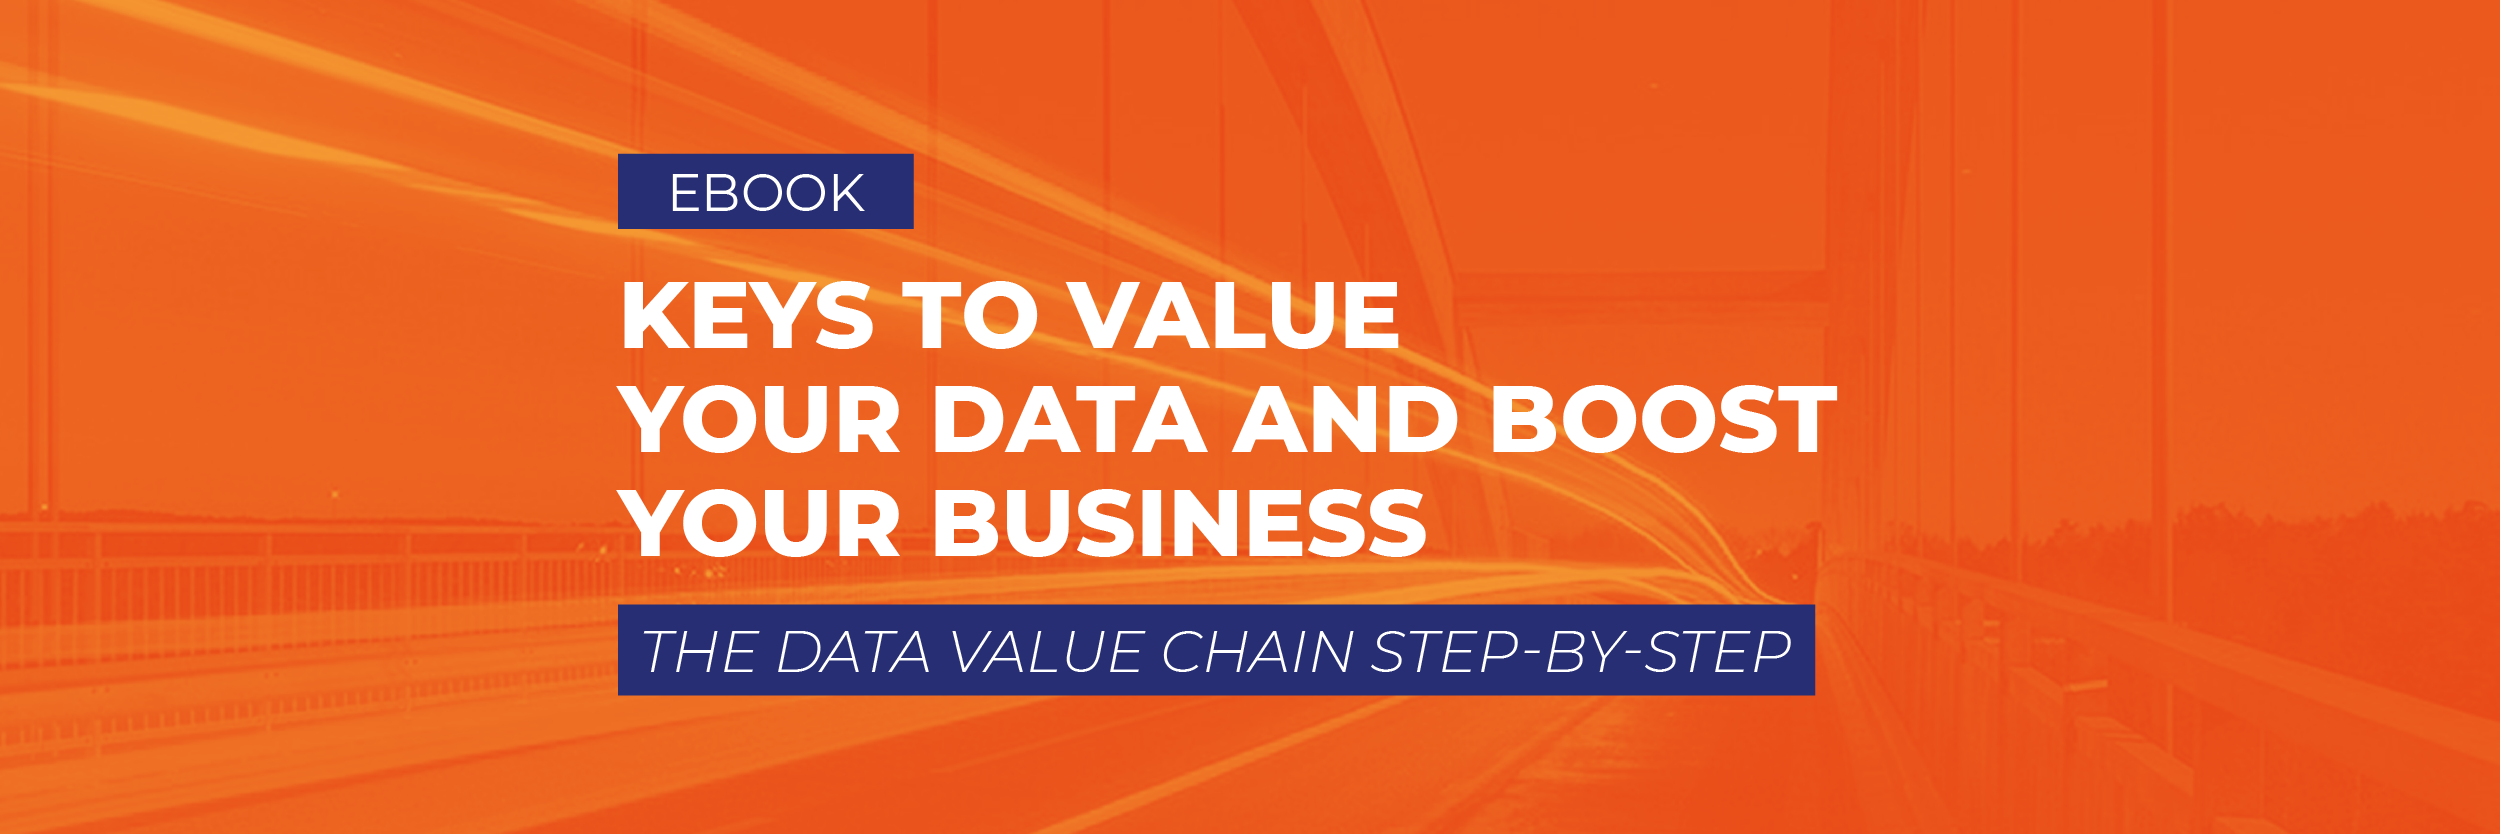 [Ebook] Maximise the value of your data